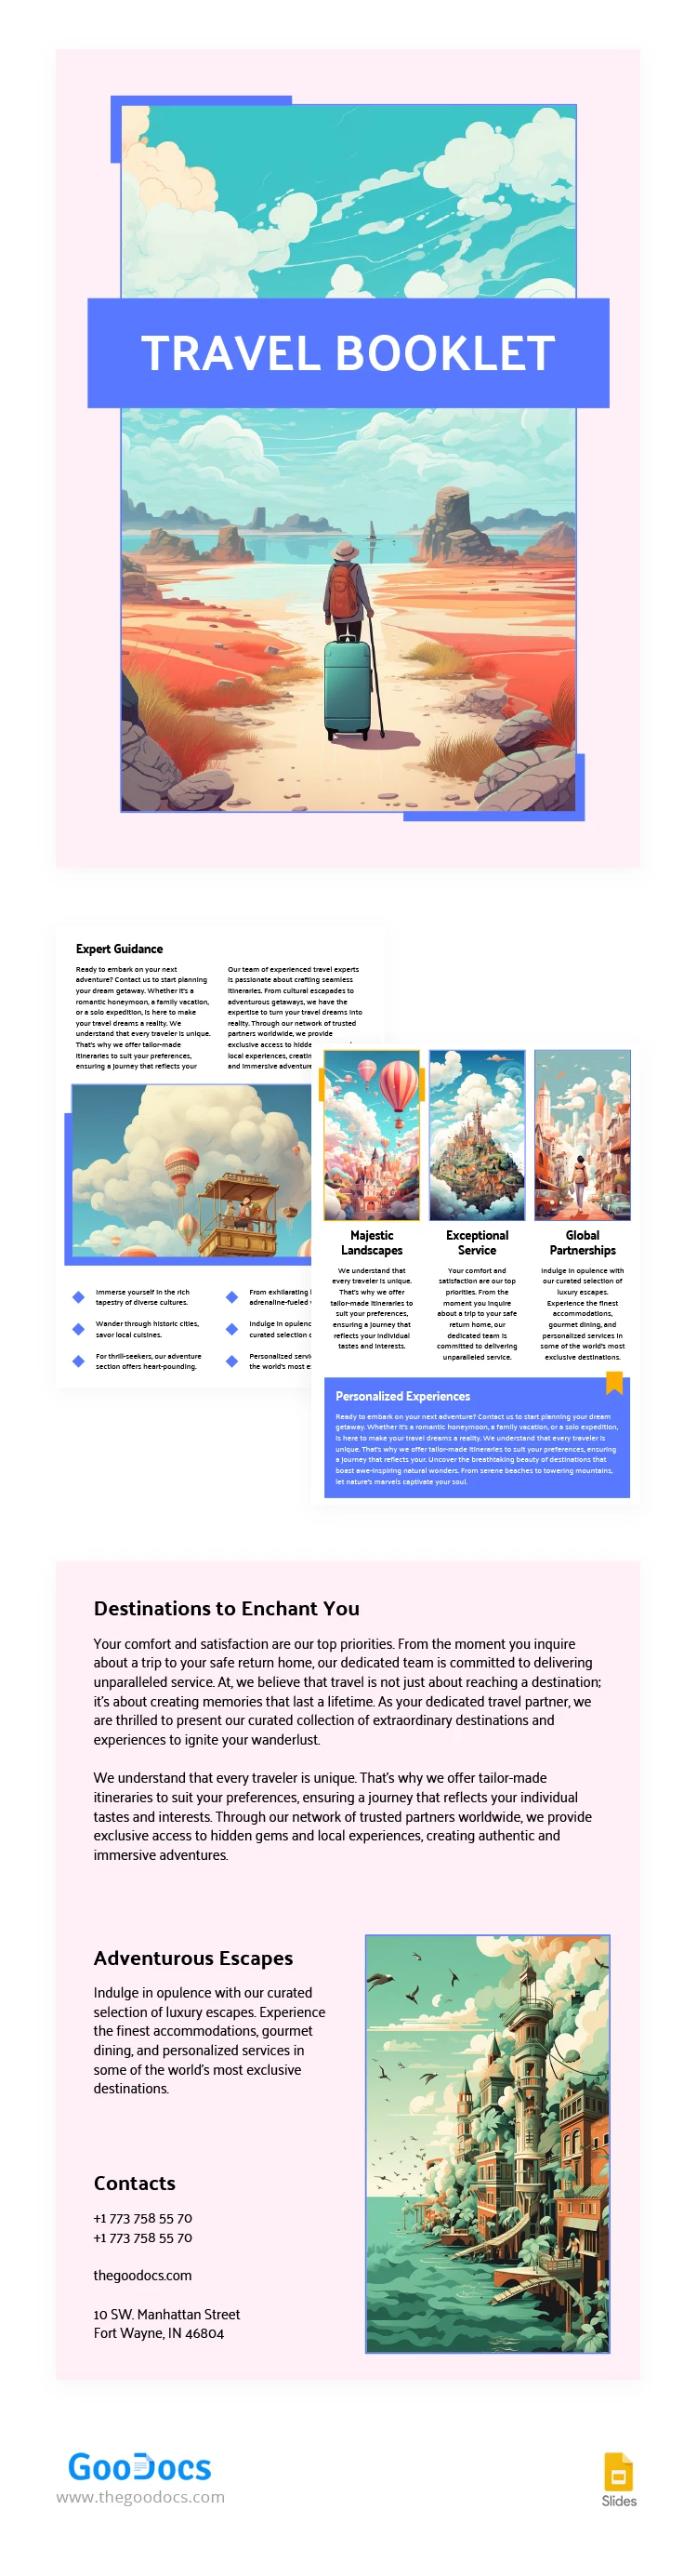 Illustrated Trendy Travel Booklet - free Google Docs Template - 10067730